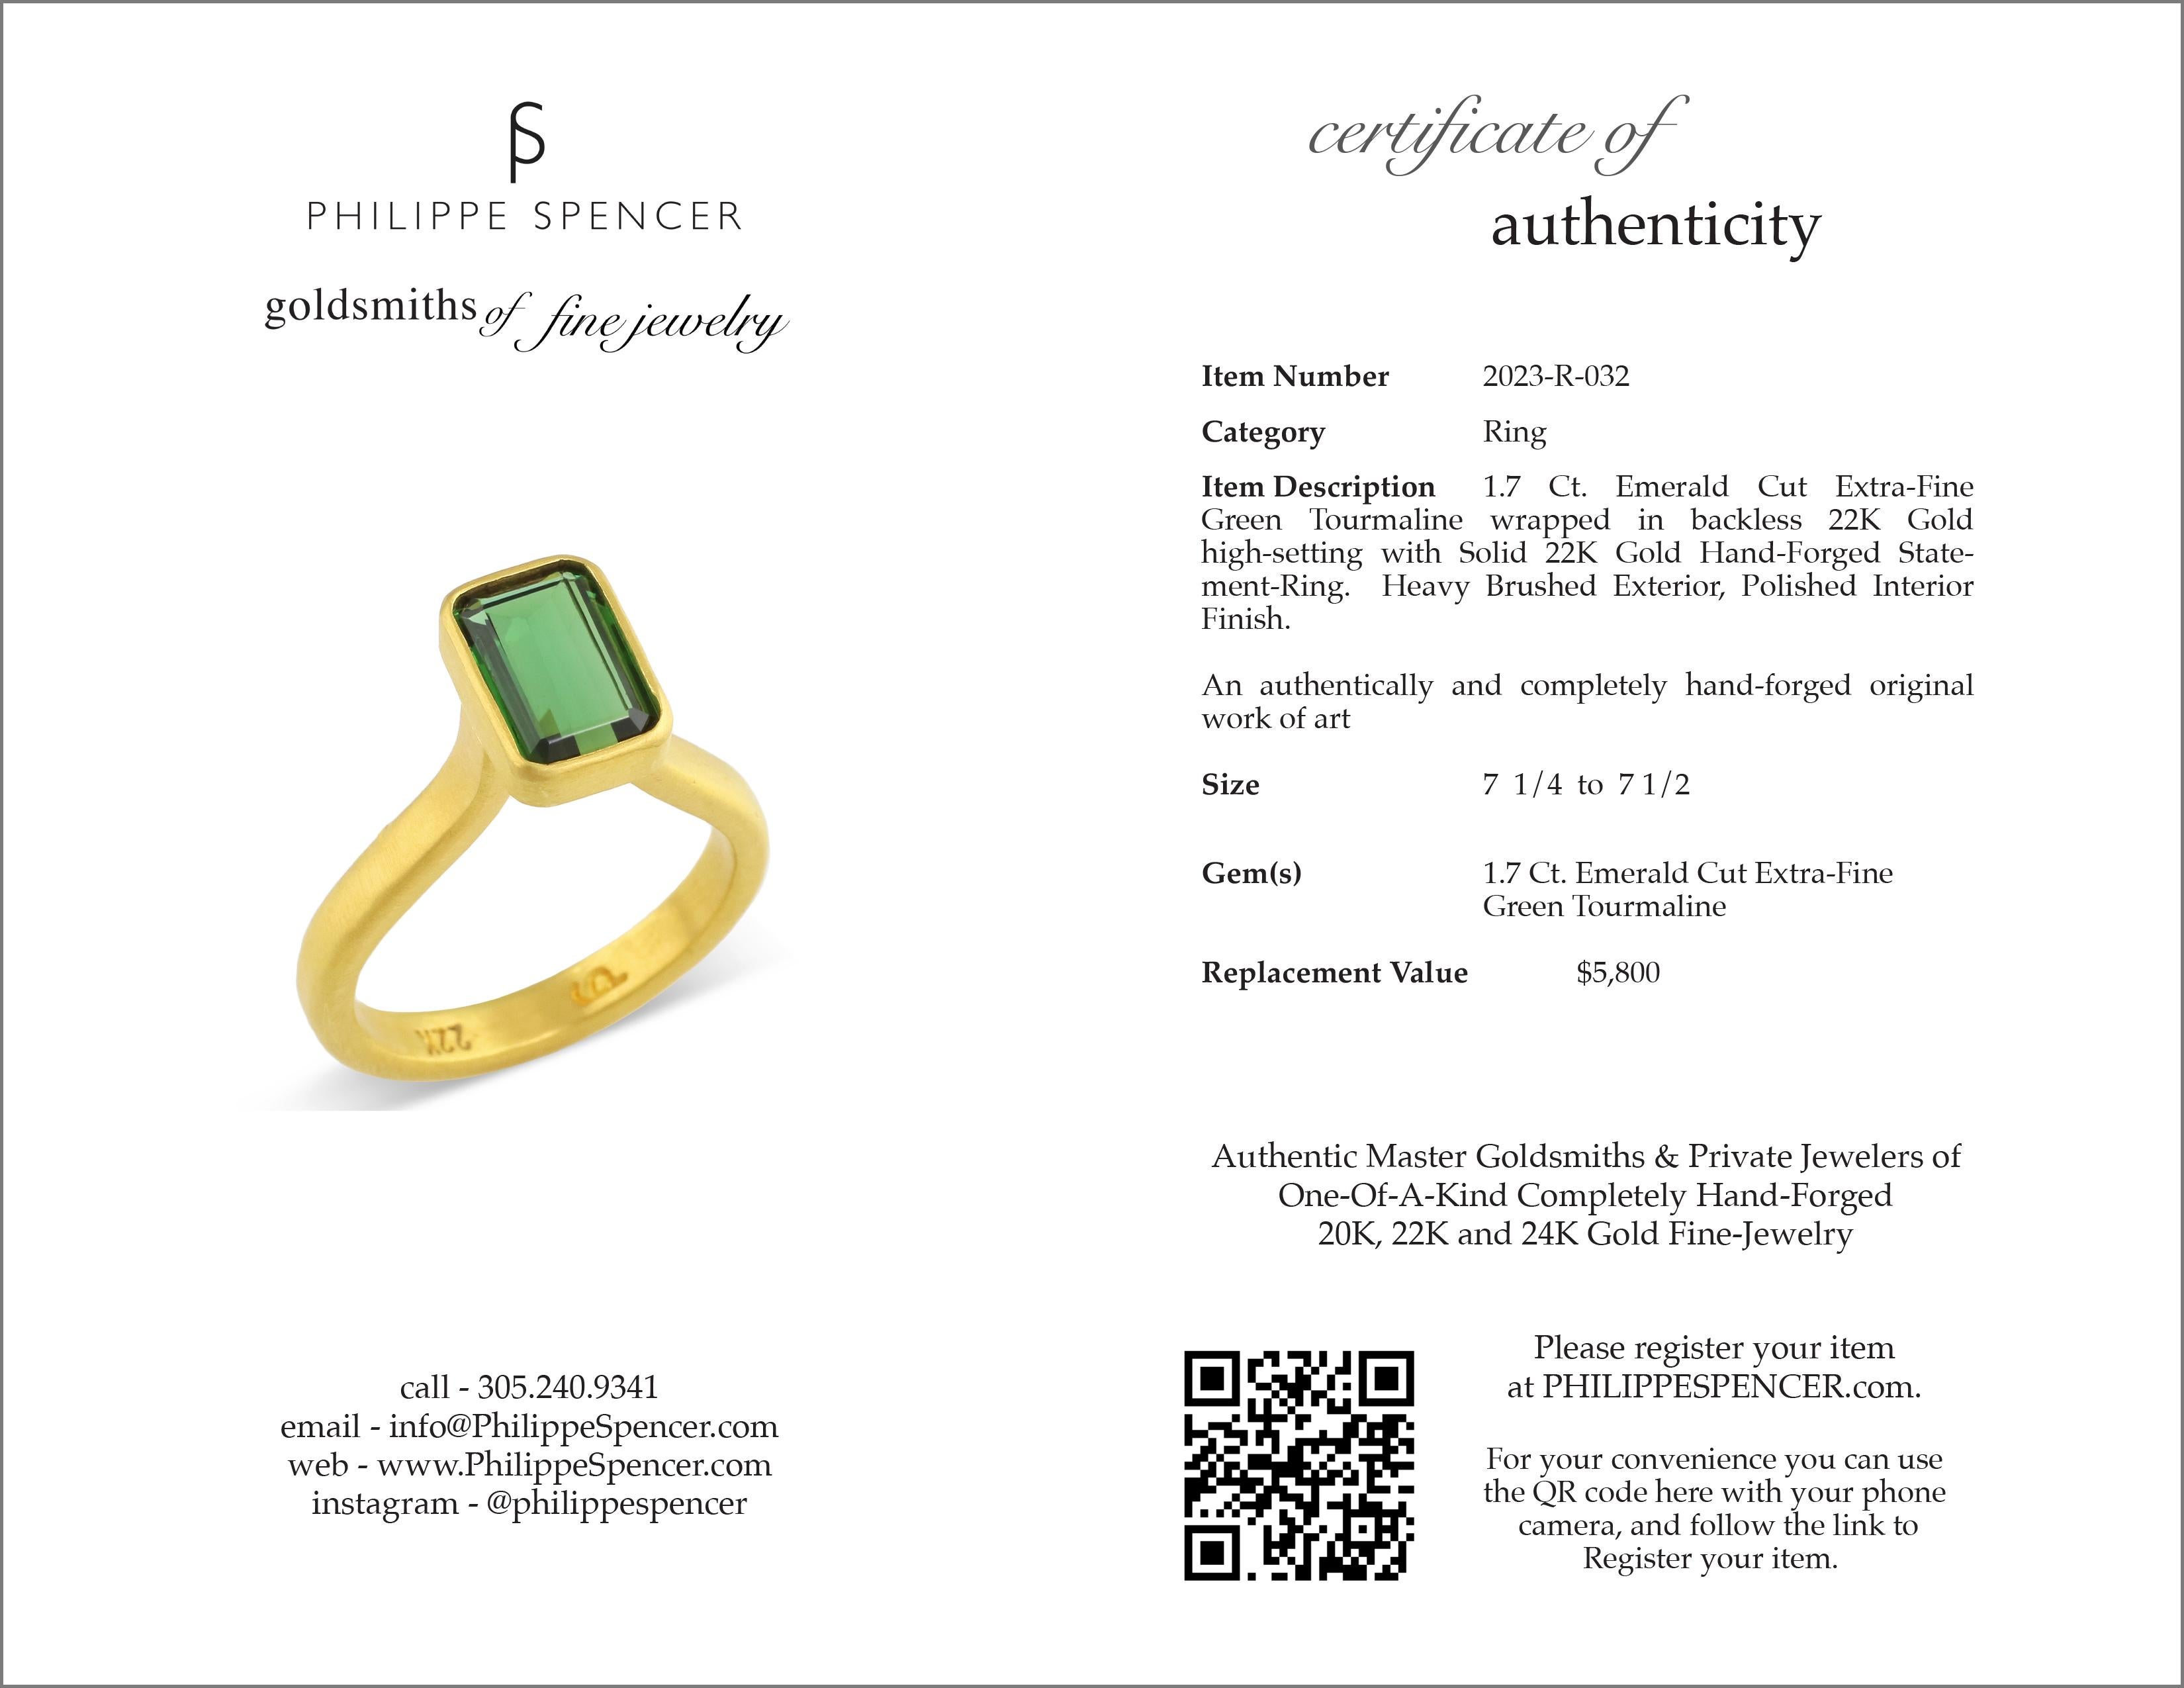 Emerald Cut PHILIPPE SPENCER 1.7 Ct. Extra-Fine Tourmaline Statement Ring in 22K Gold For Sale